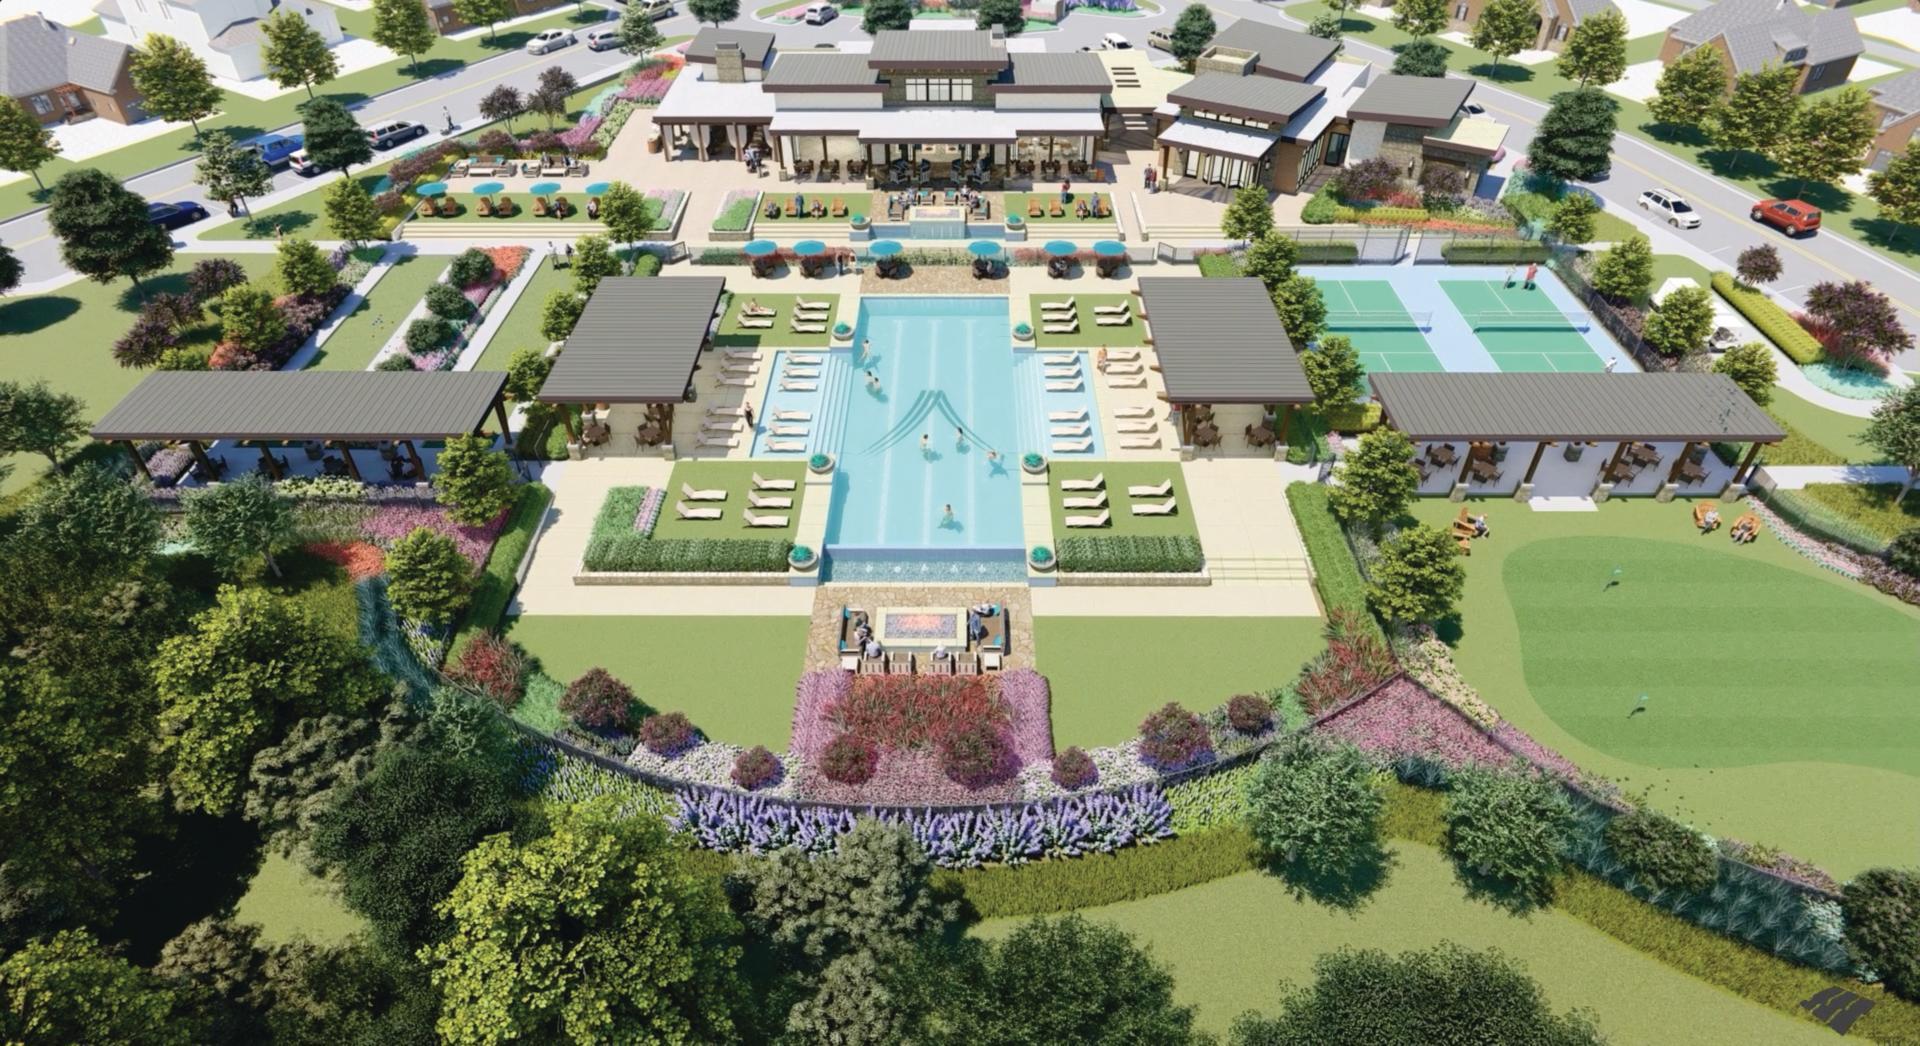 The Viridian Elements Amenity Center and Pool